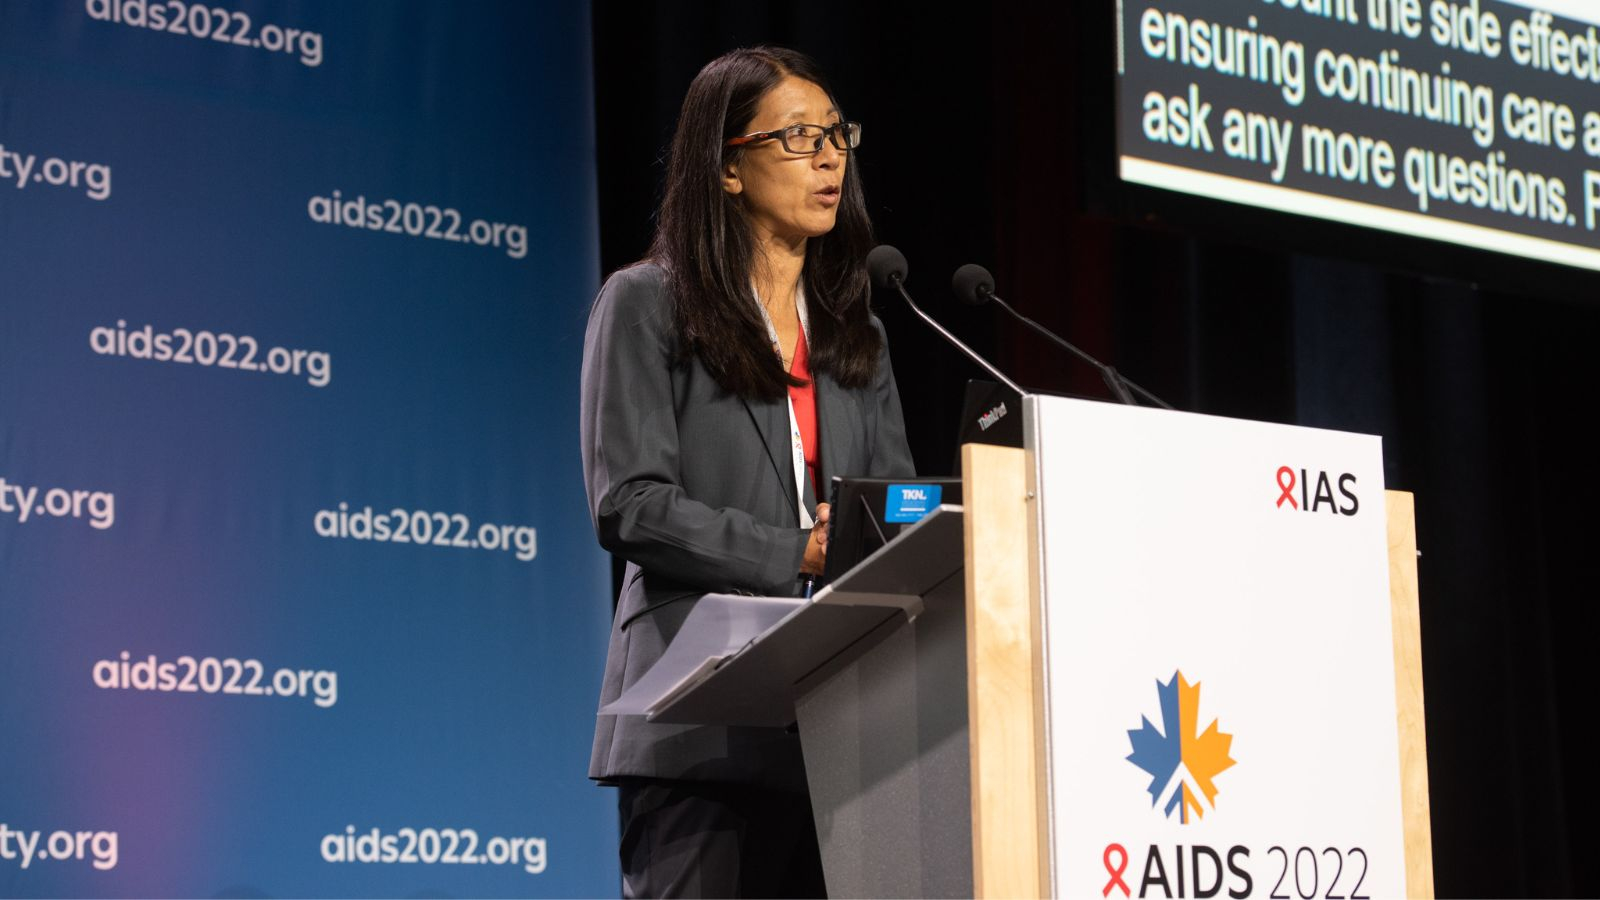 Joanne Liu at the AIDS 2022 podium gives opening remarks at session on HIV in armed conflicts